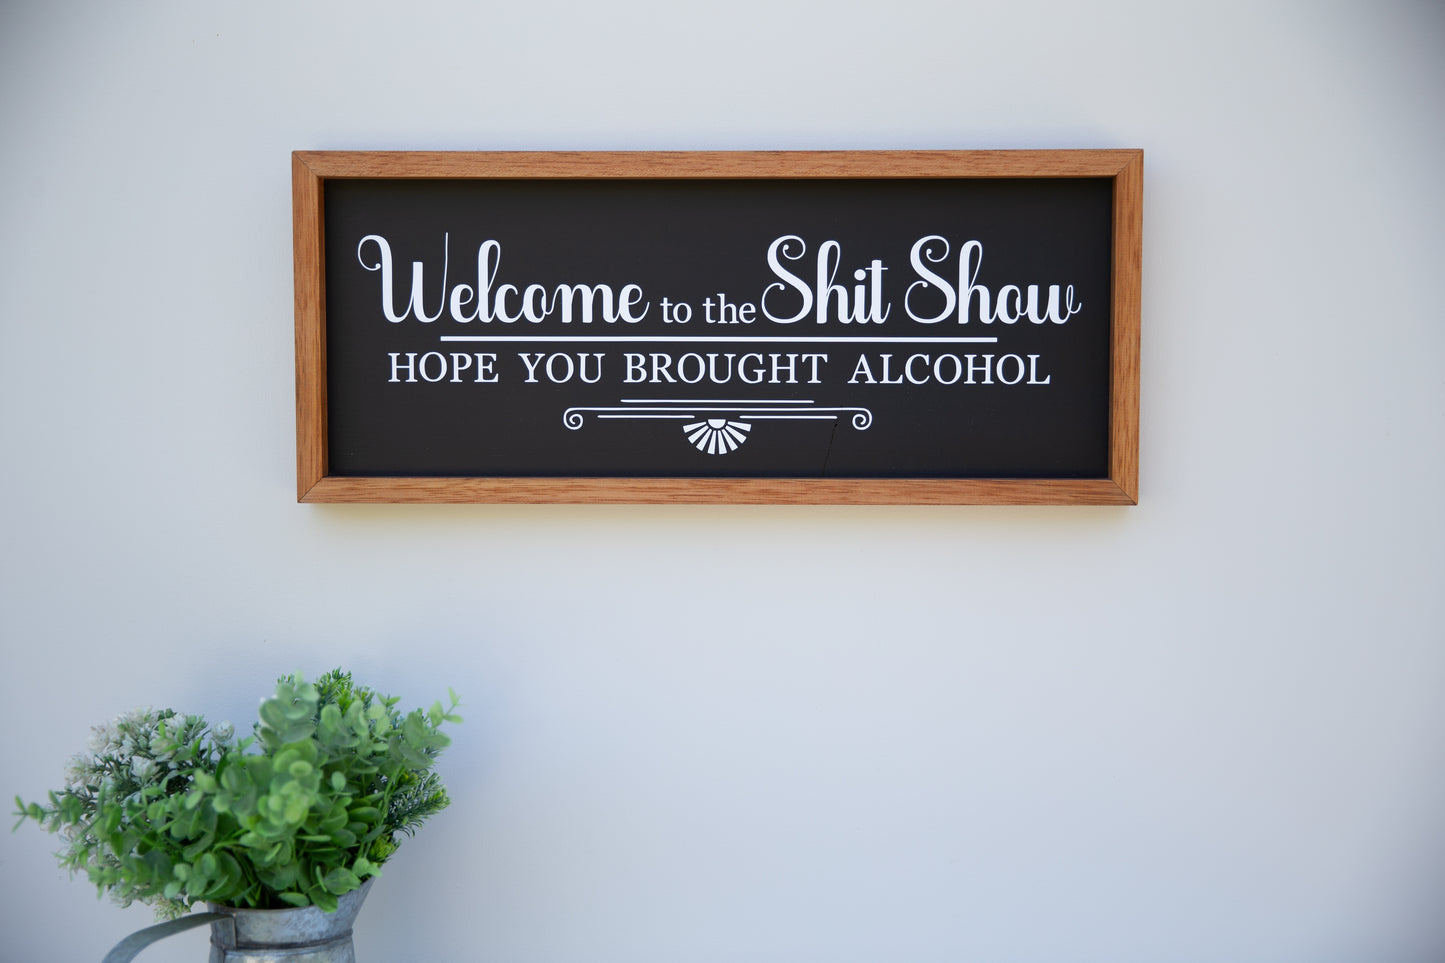 Welcome to the Shit Show - Hope you brought Alcohol